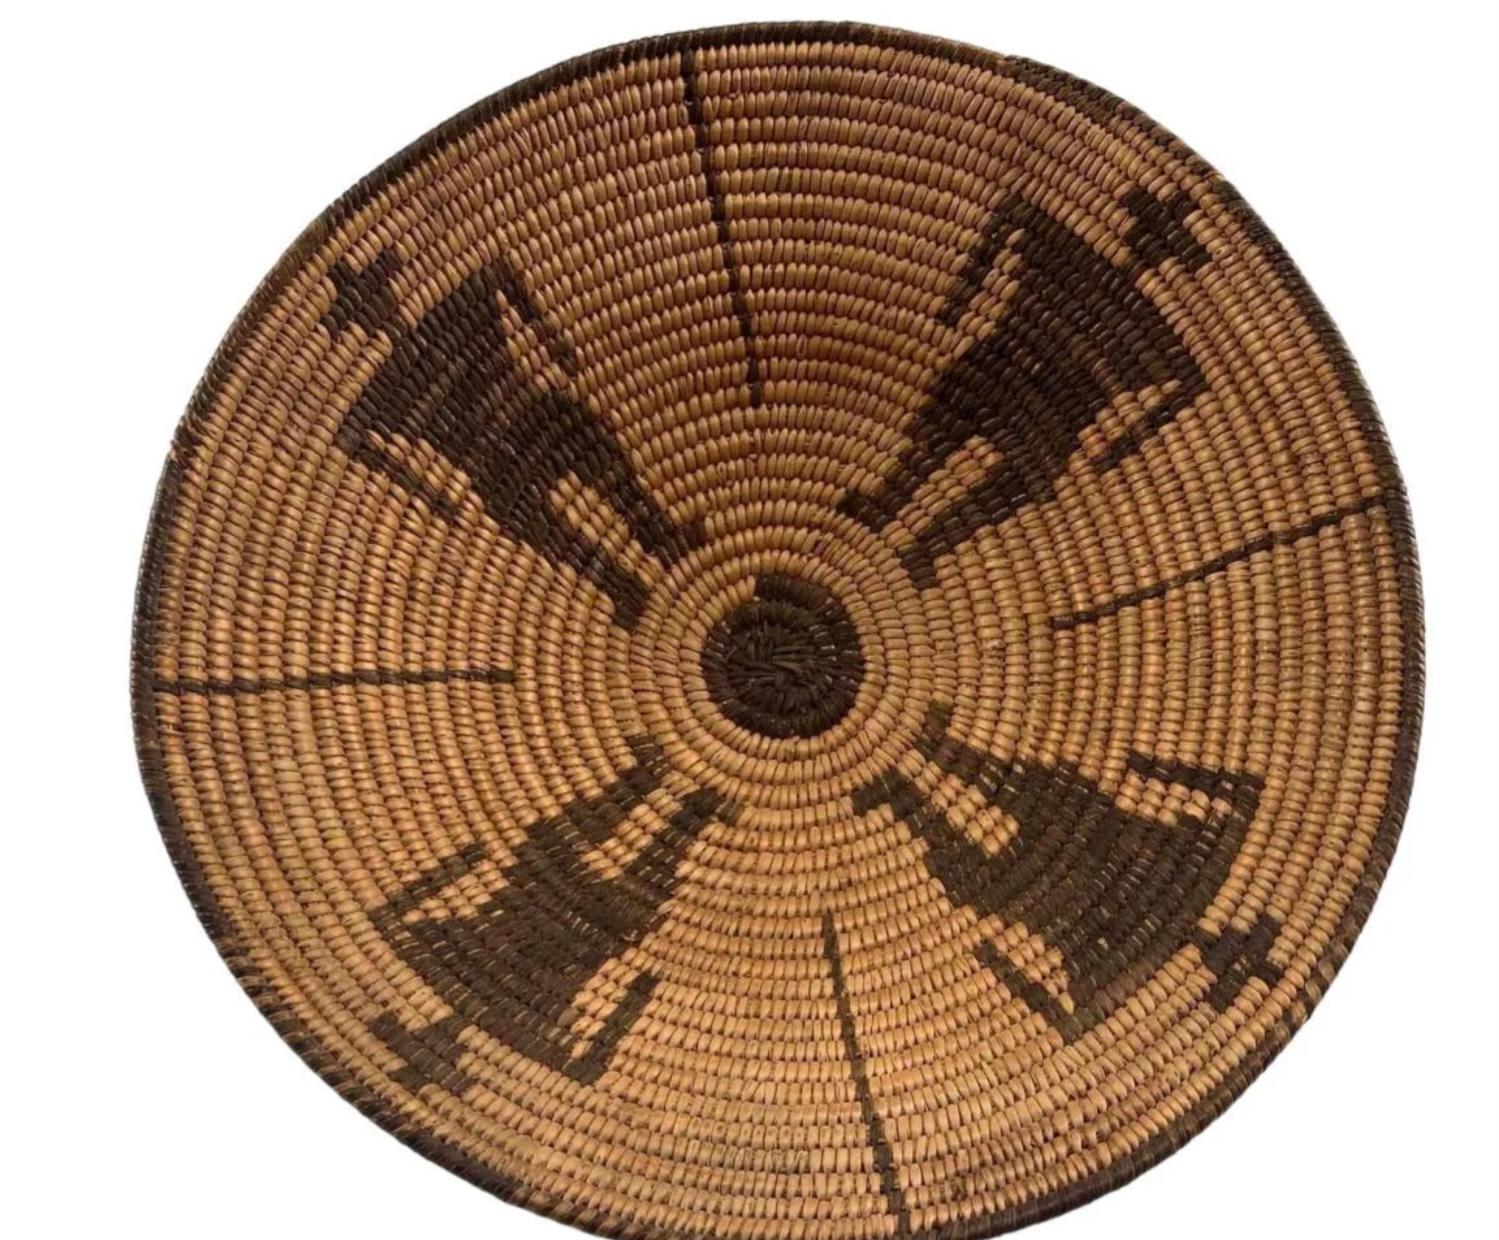 Native American pictorial pima basket with geometric figural motif, having four figures, circa. 1920s. Made of bear grass, Devil's claw and willow. Excellent condition.